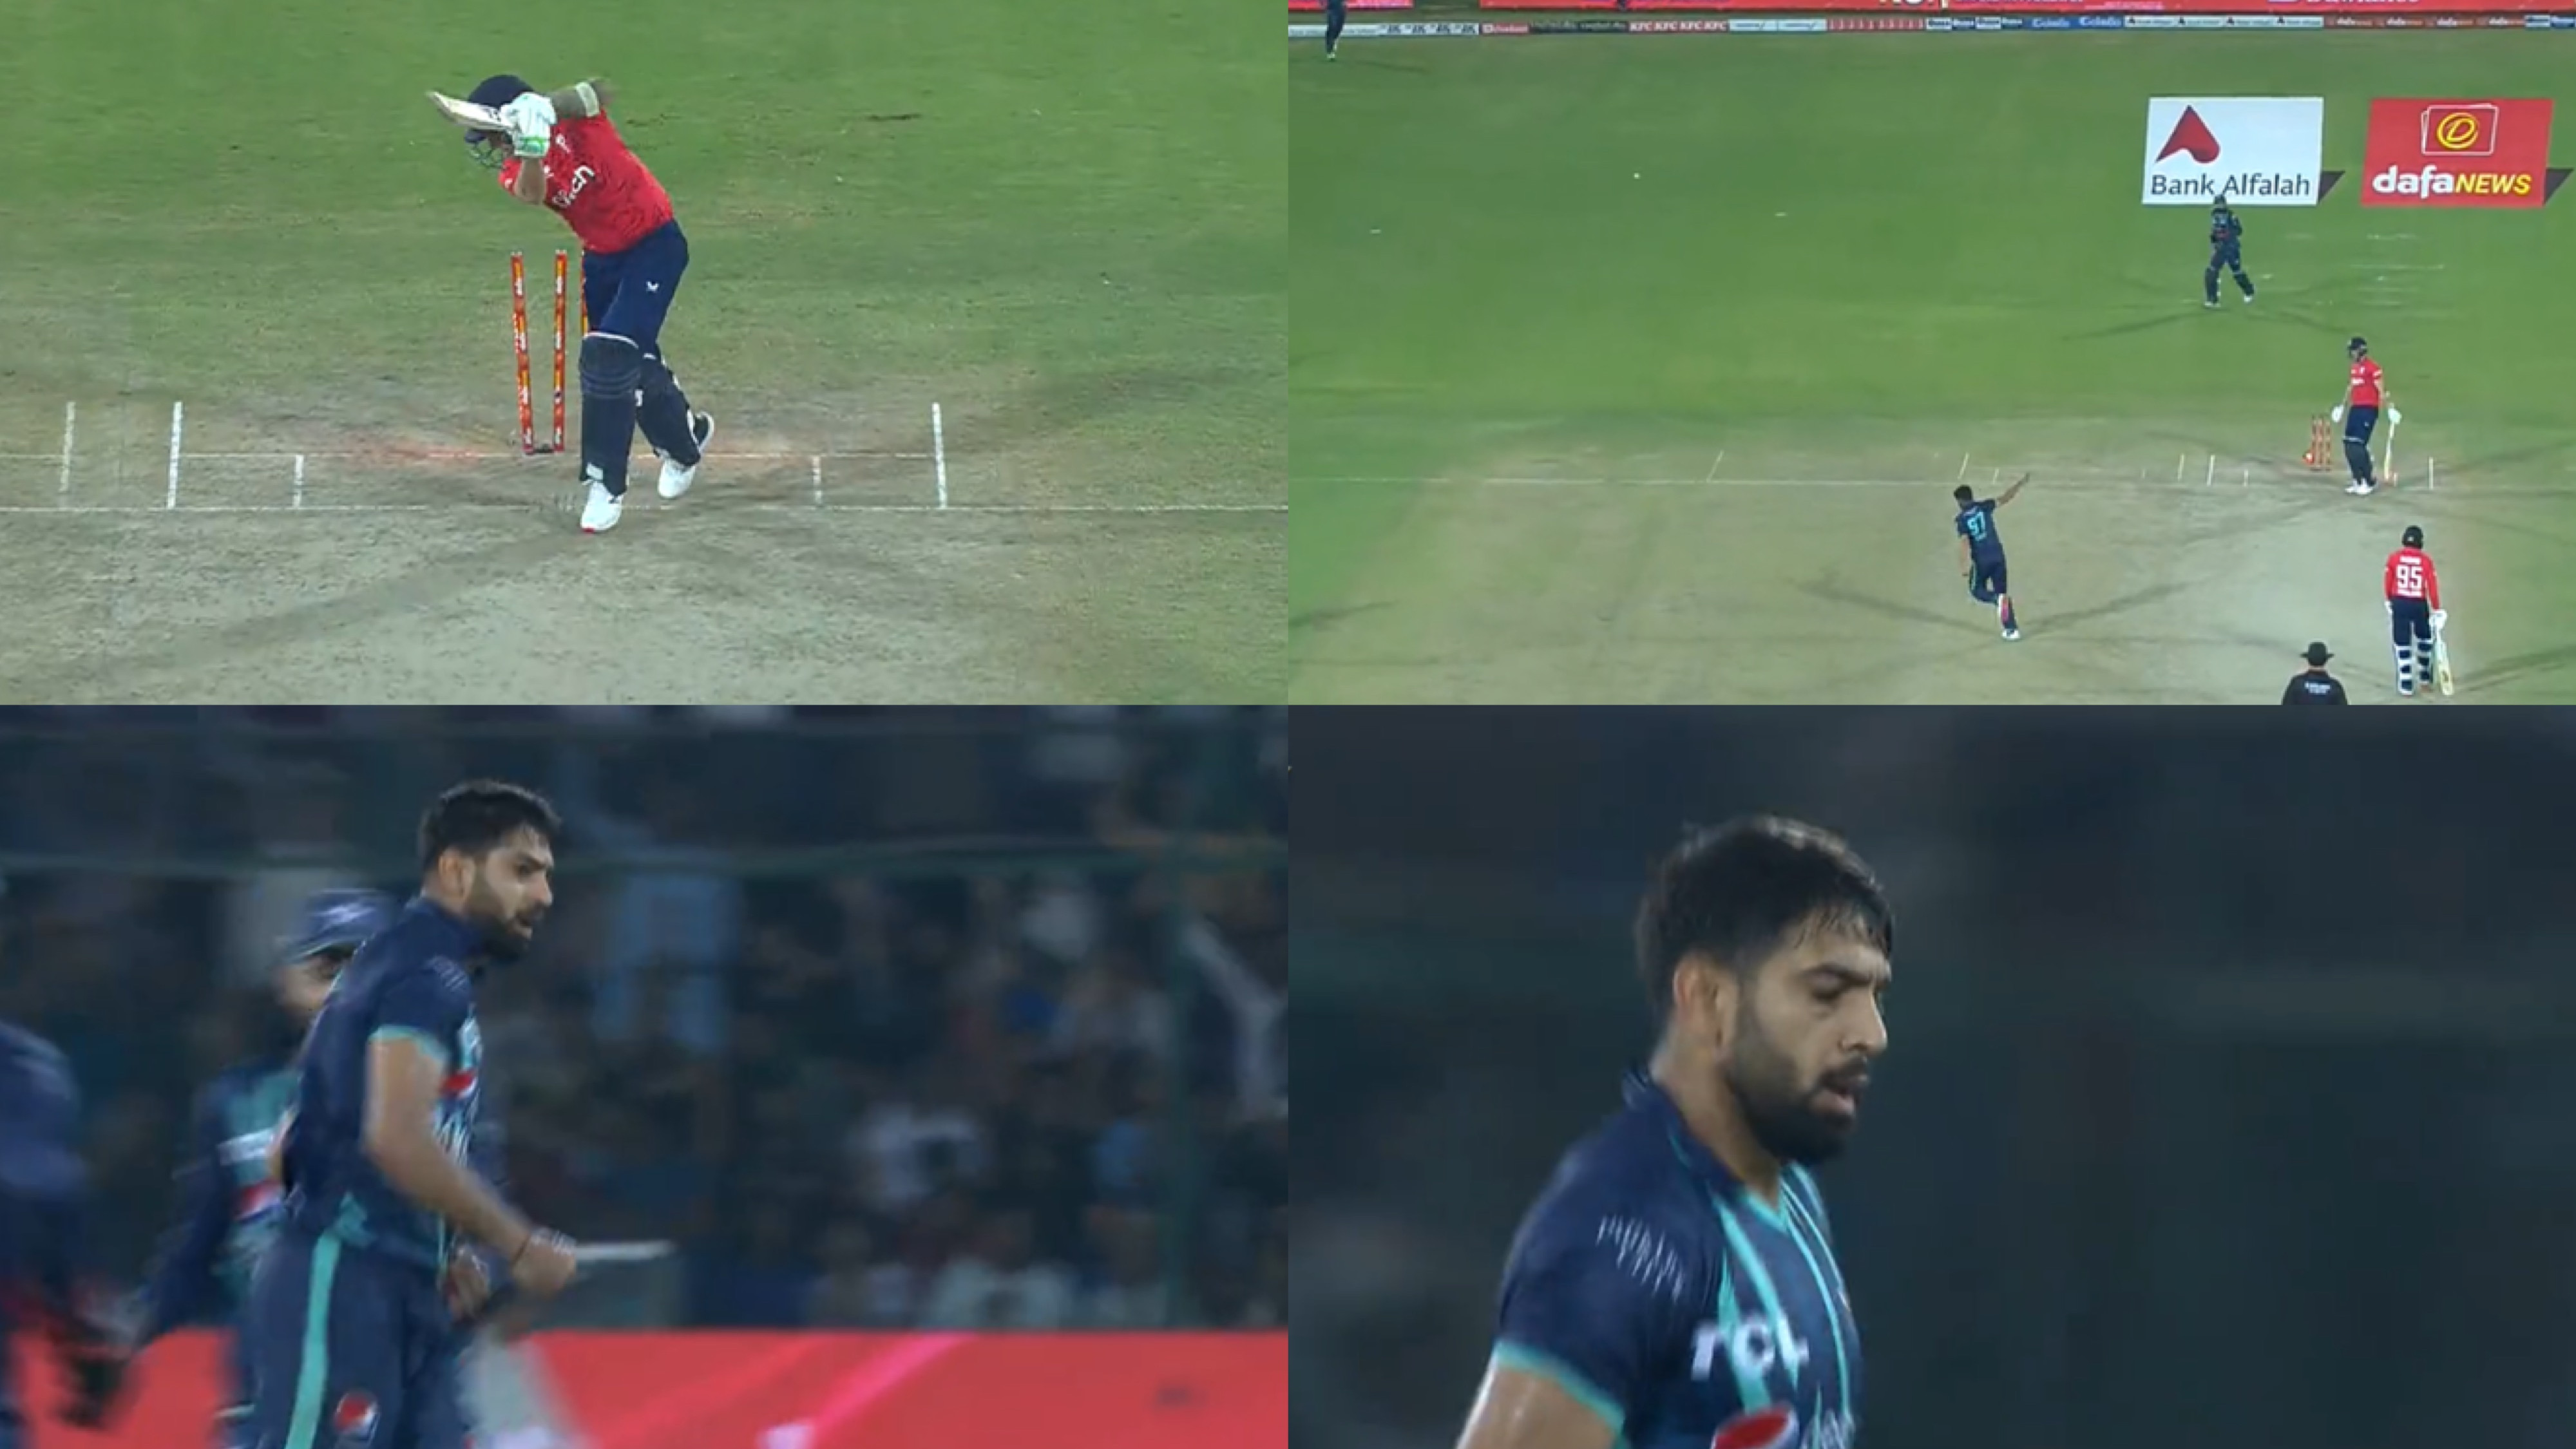 PAK v ENG 2022: WATCH - Haris Rauf’s double-strike in 19th over to turn the 4th T20I towards Pakistan